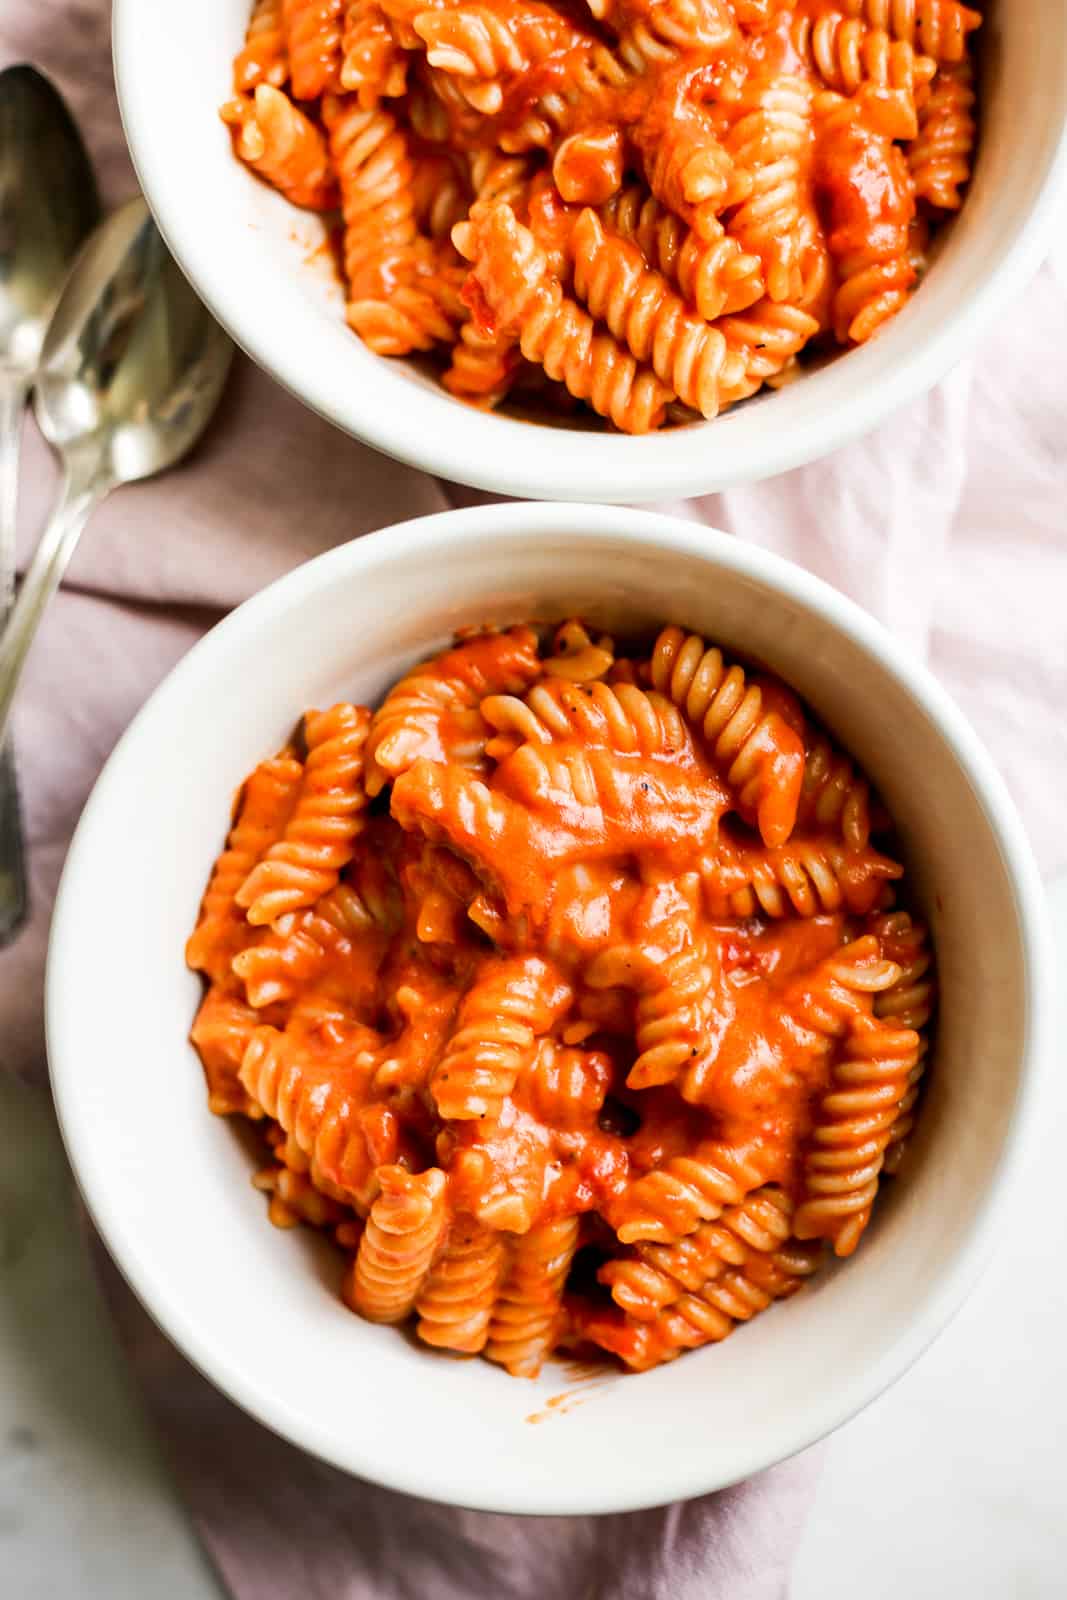 32 Different Types of Pasta with Pictures